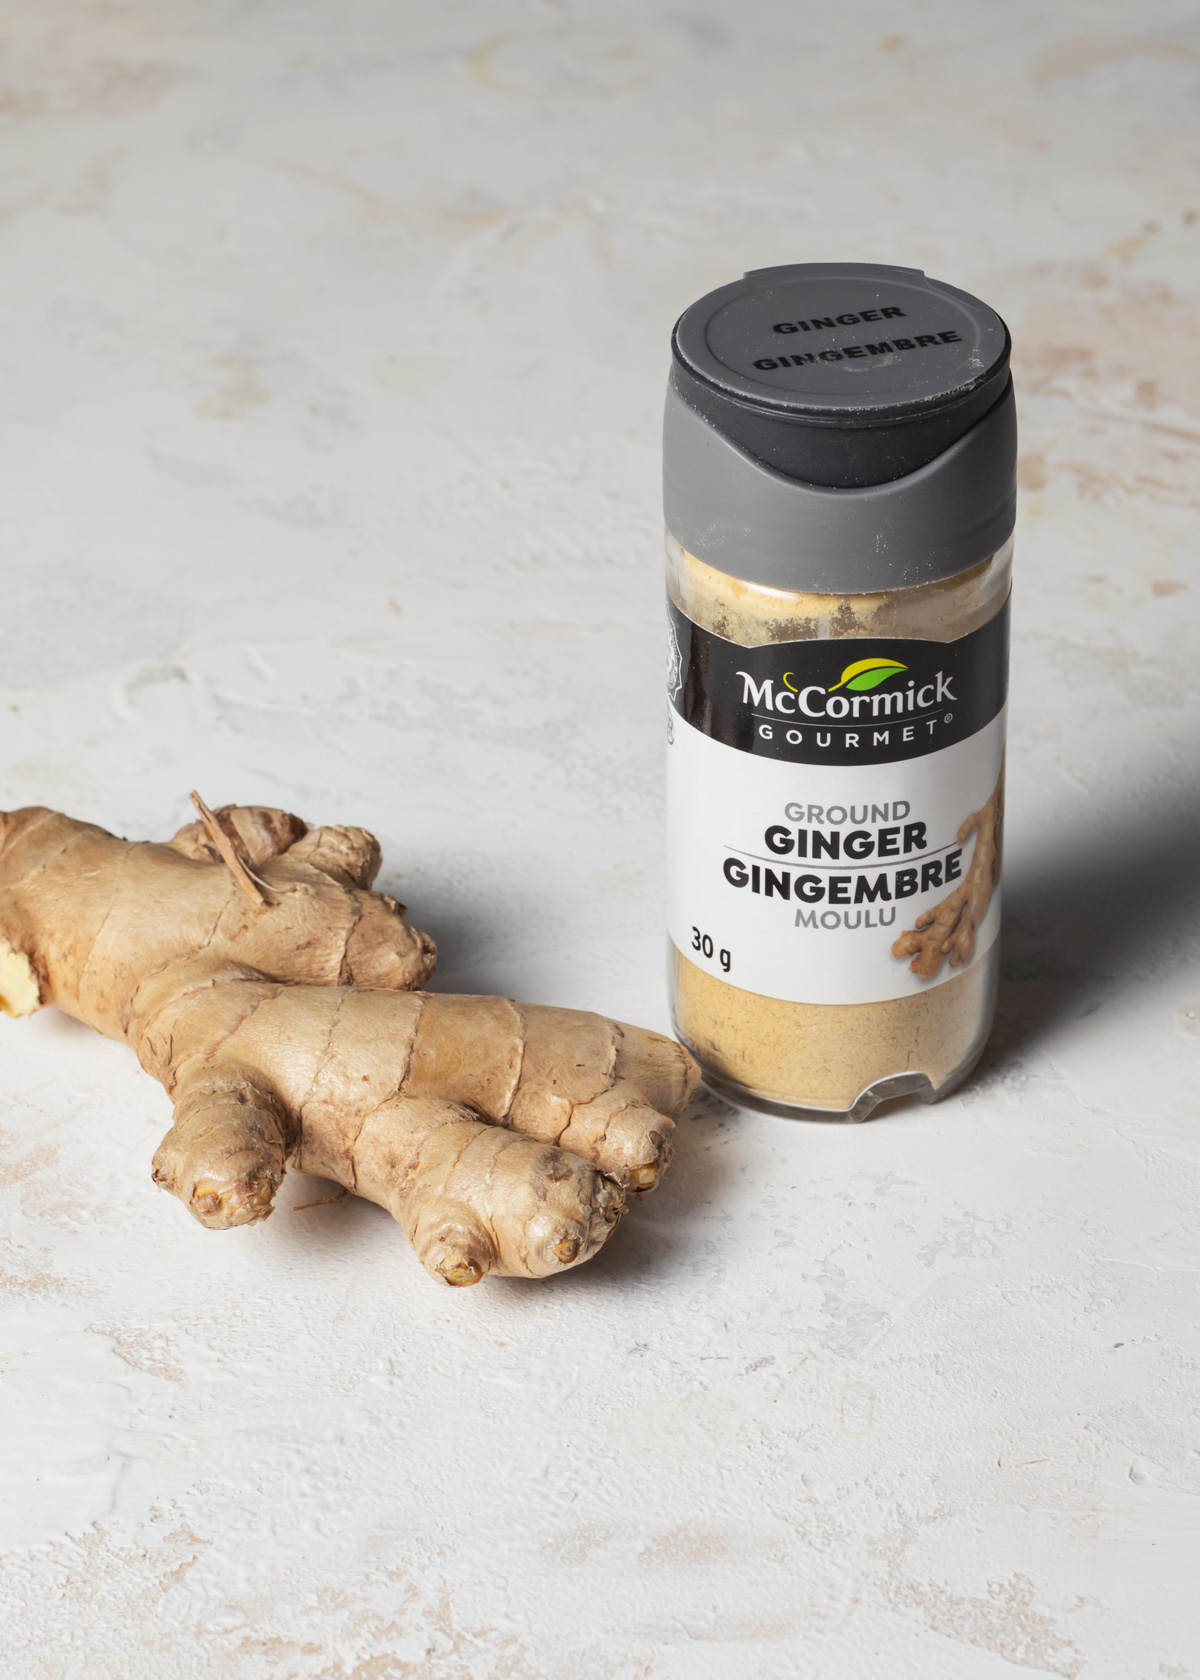 Fresh ginger root next to a jar of ground ginger